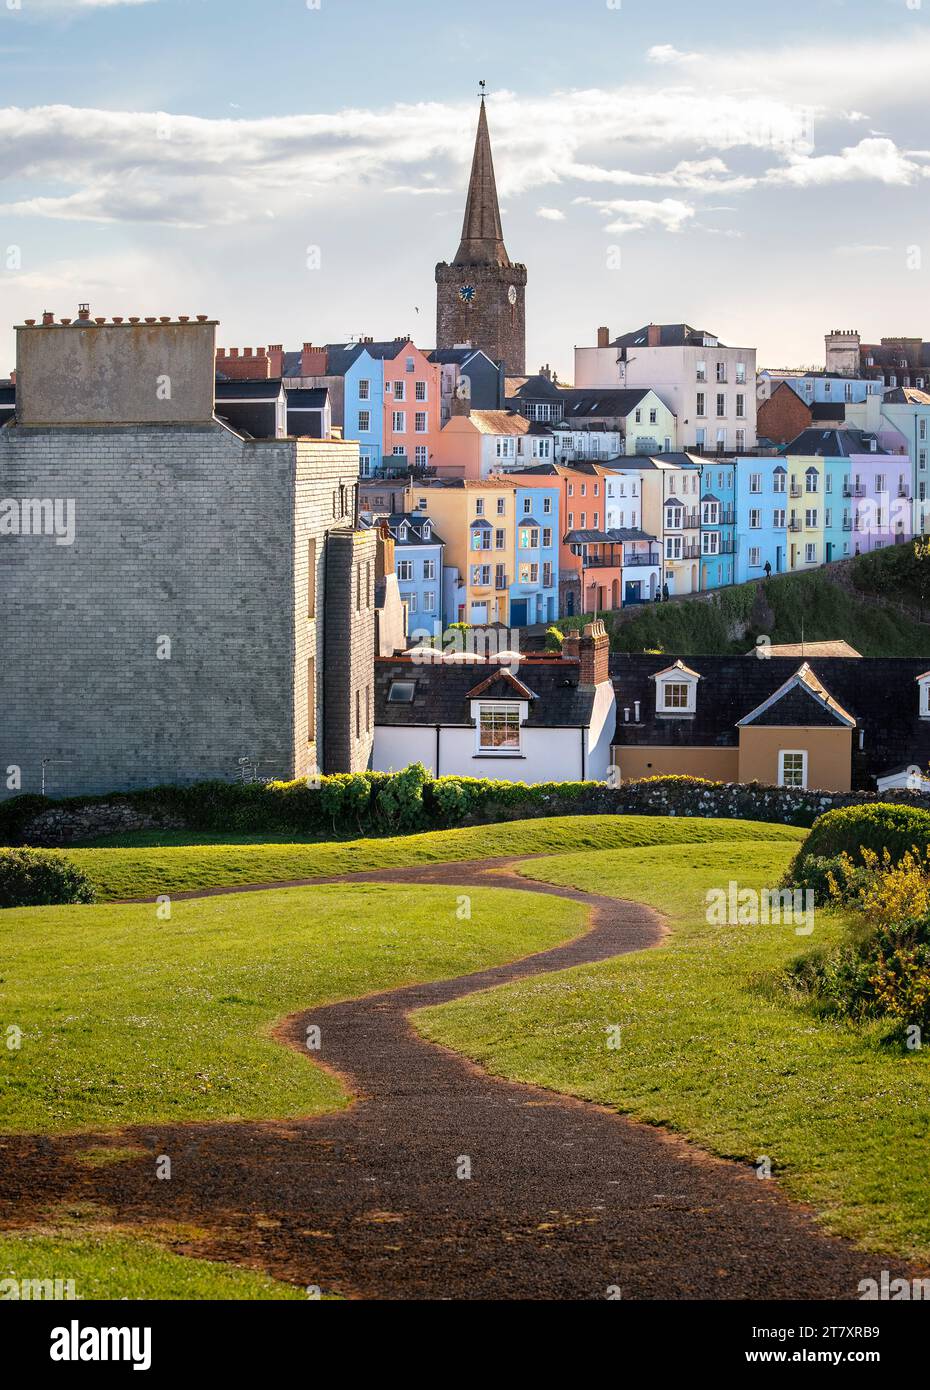 Colorful rooftops and church spire in the seaside village of Tenby on the Pembrokeshire Coast, Wales, United Kingdom, Europe Stock Photo